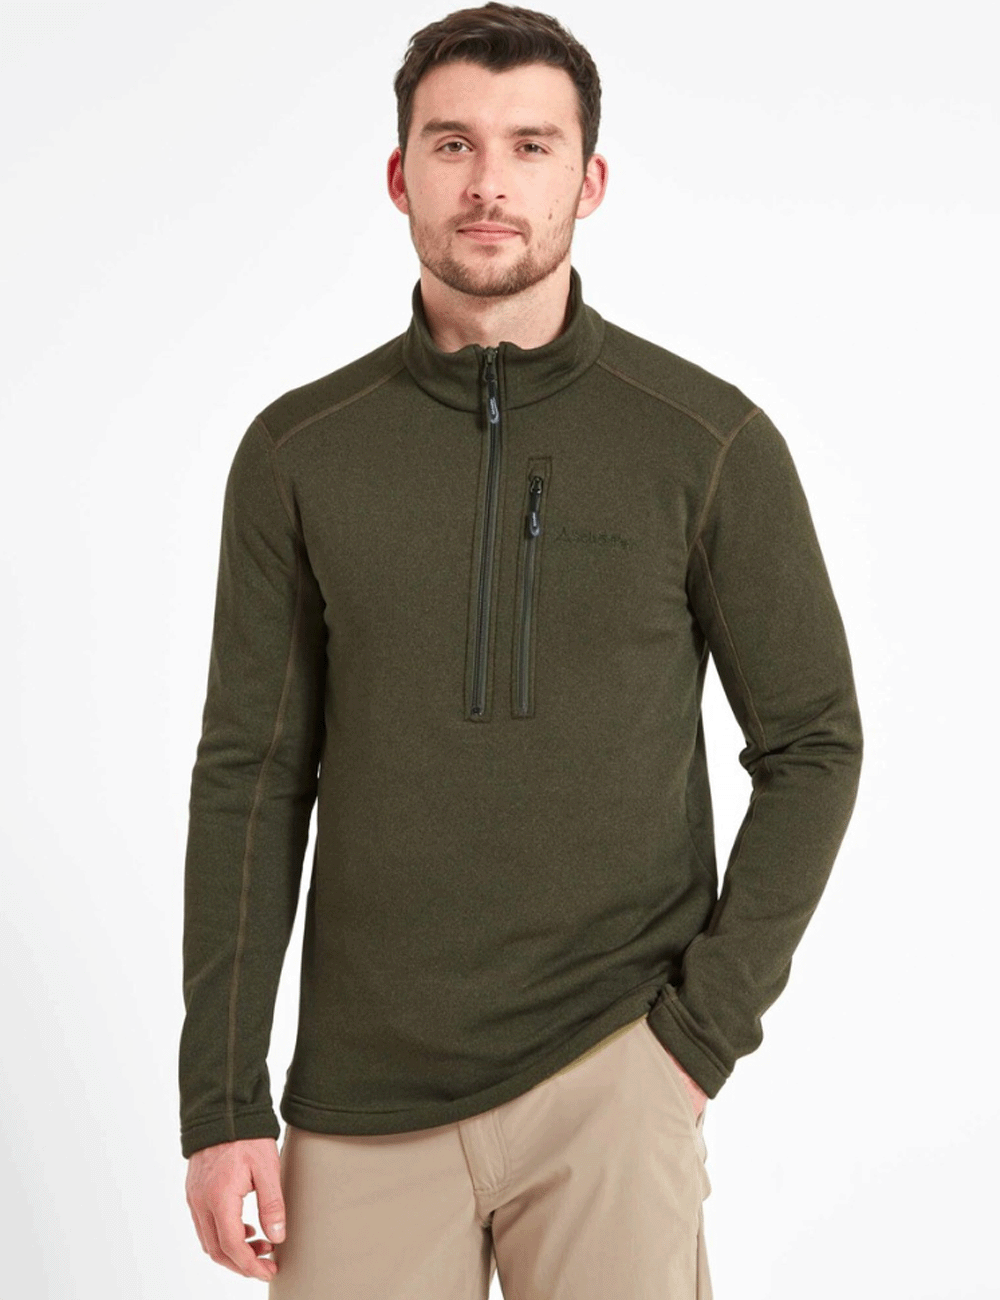 Man wearing the Annan II Technical 1/4 Zip with beige trousers